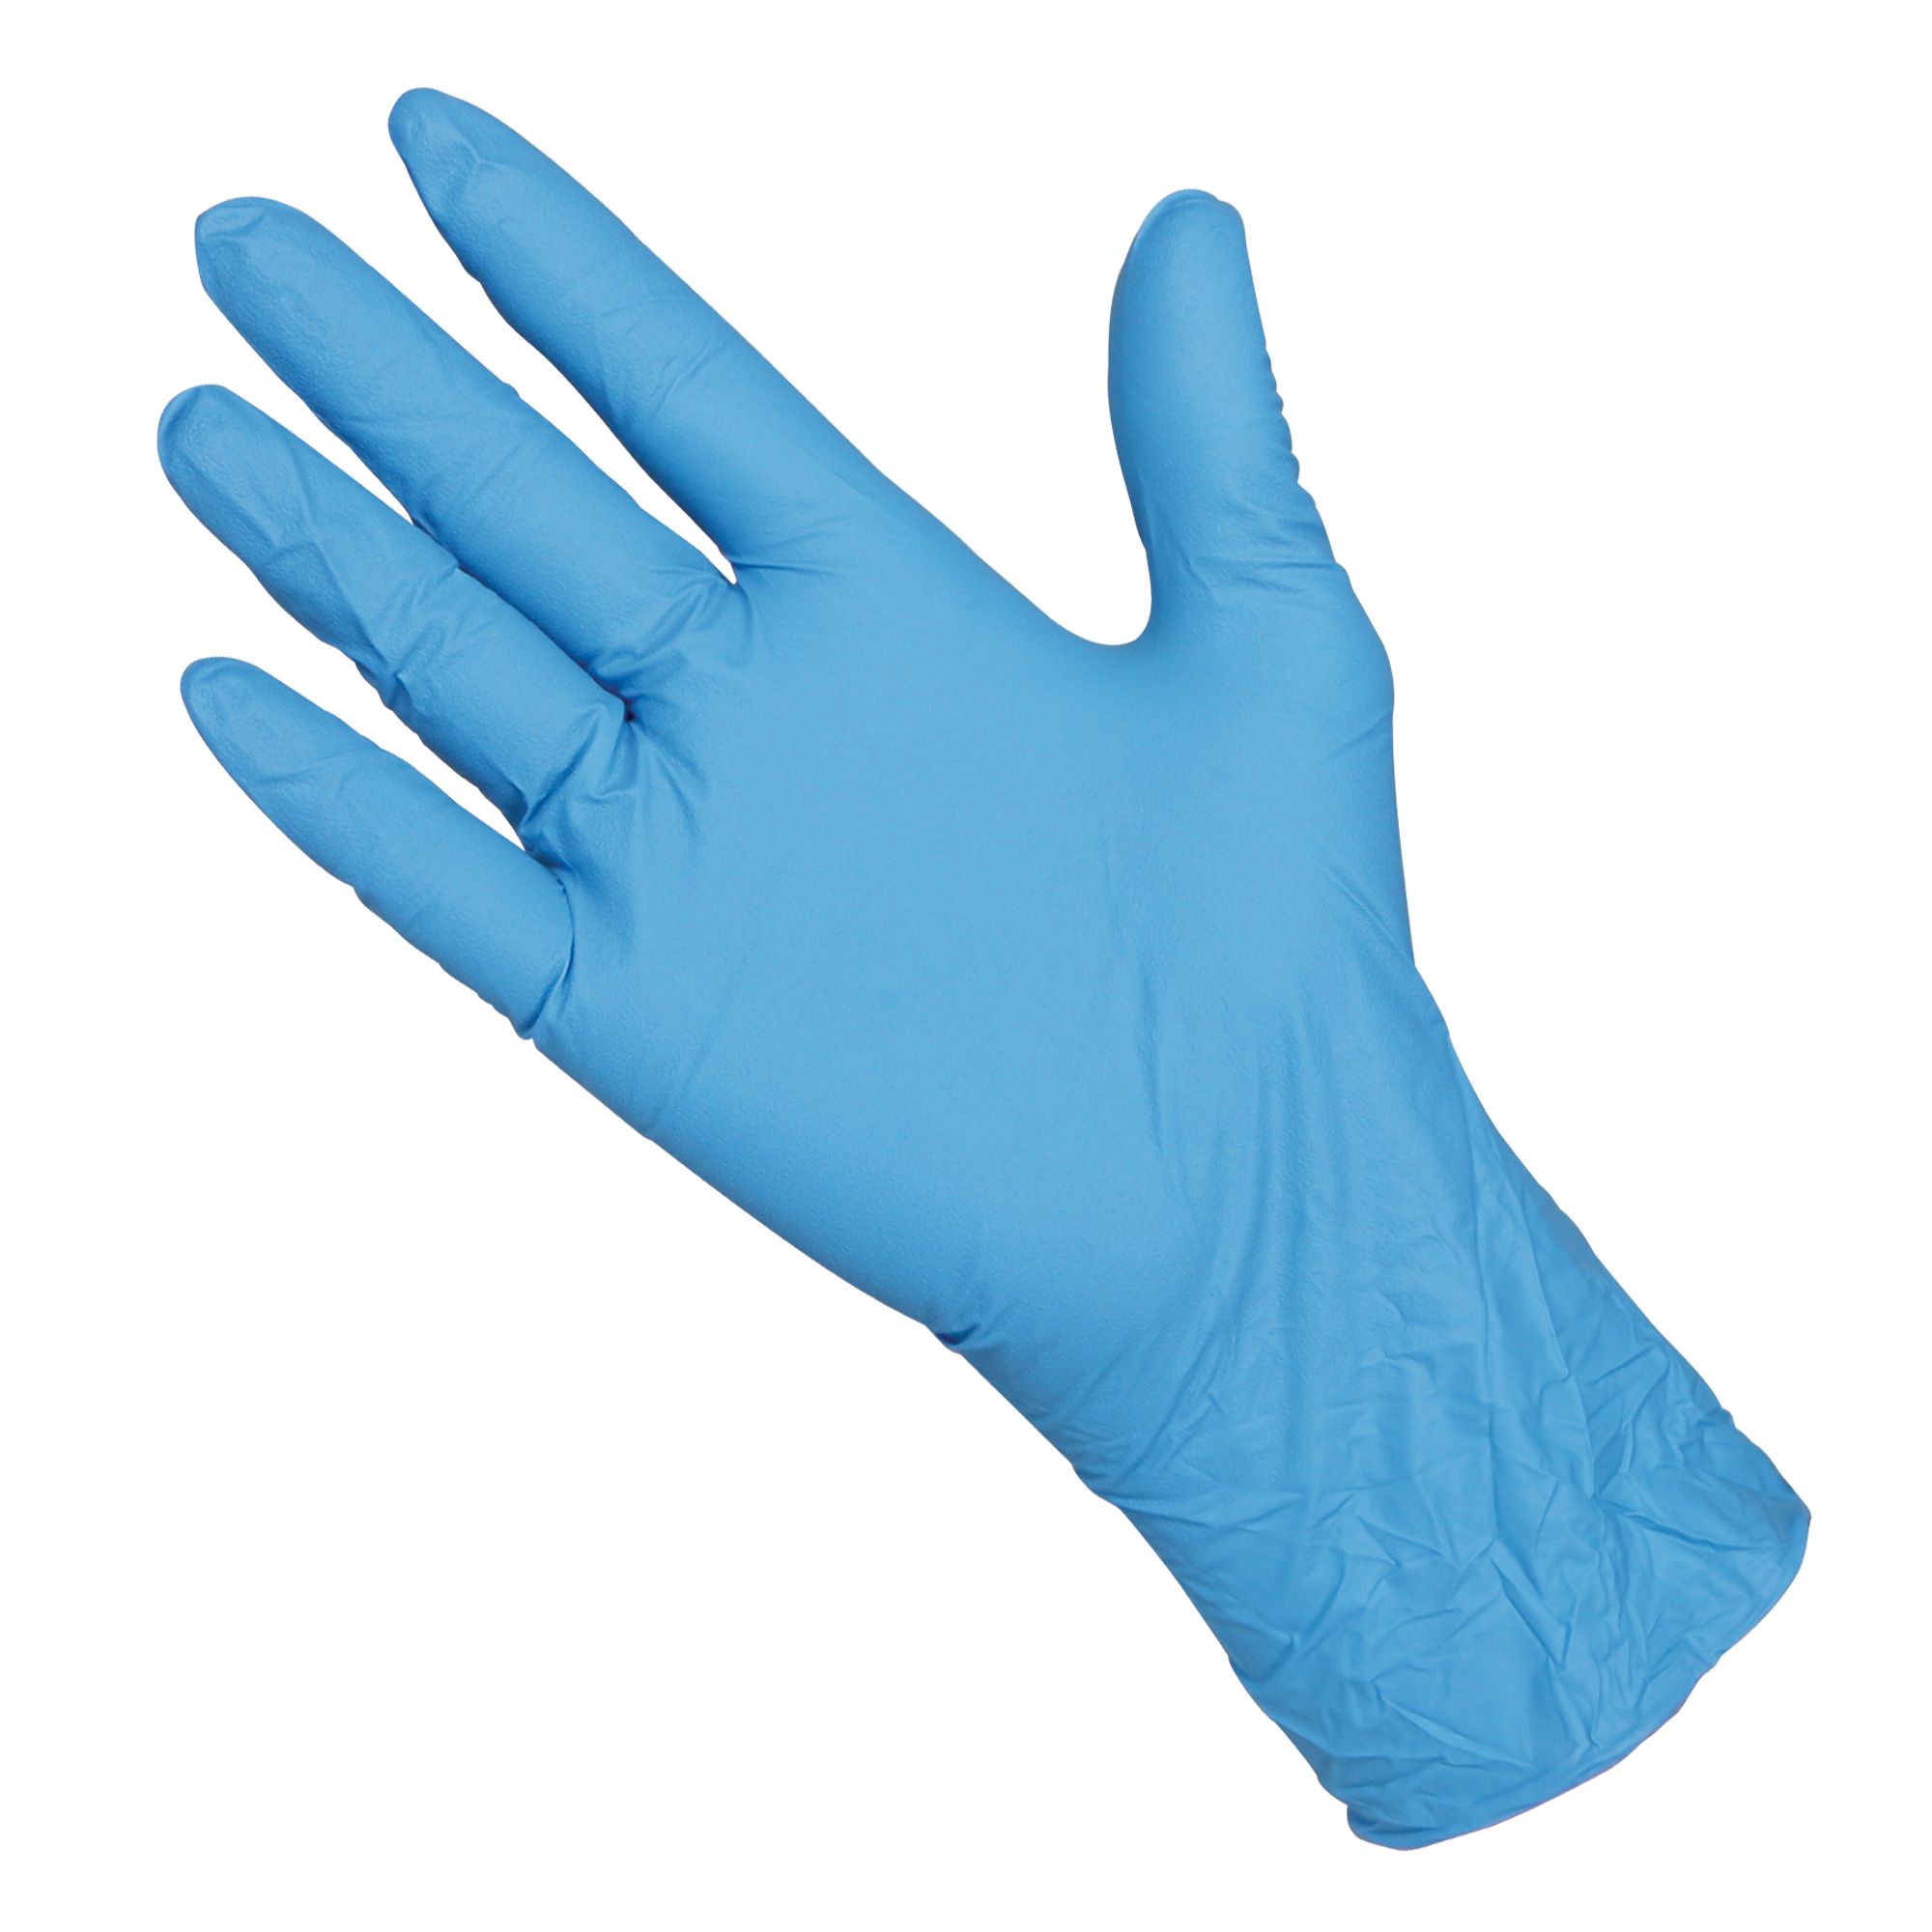 50 Pairs No Powder Nitrile Industrial Glove Disposable Protective Gloves,Latex Safety Working Gloves